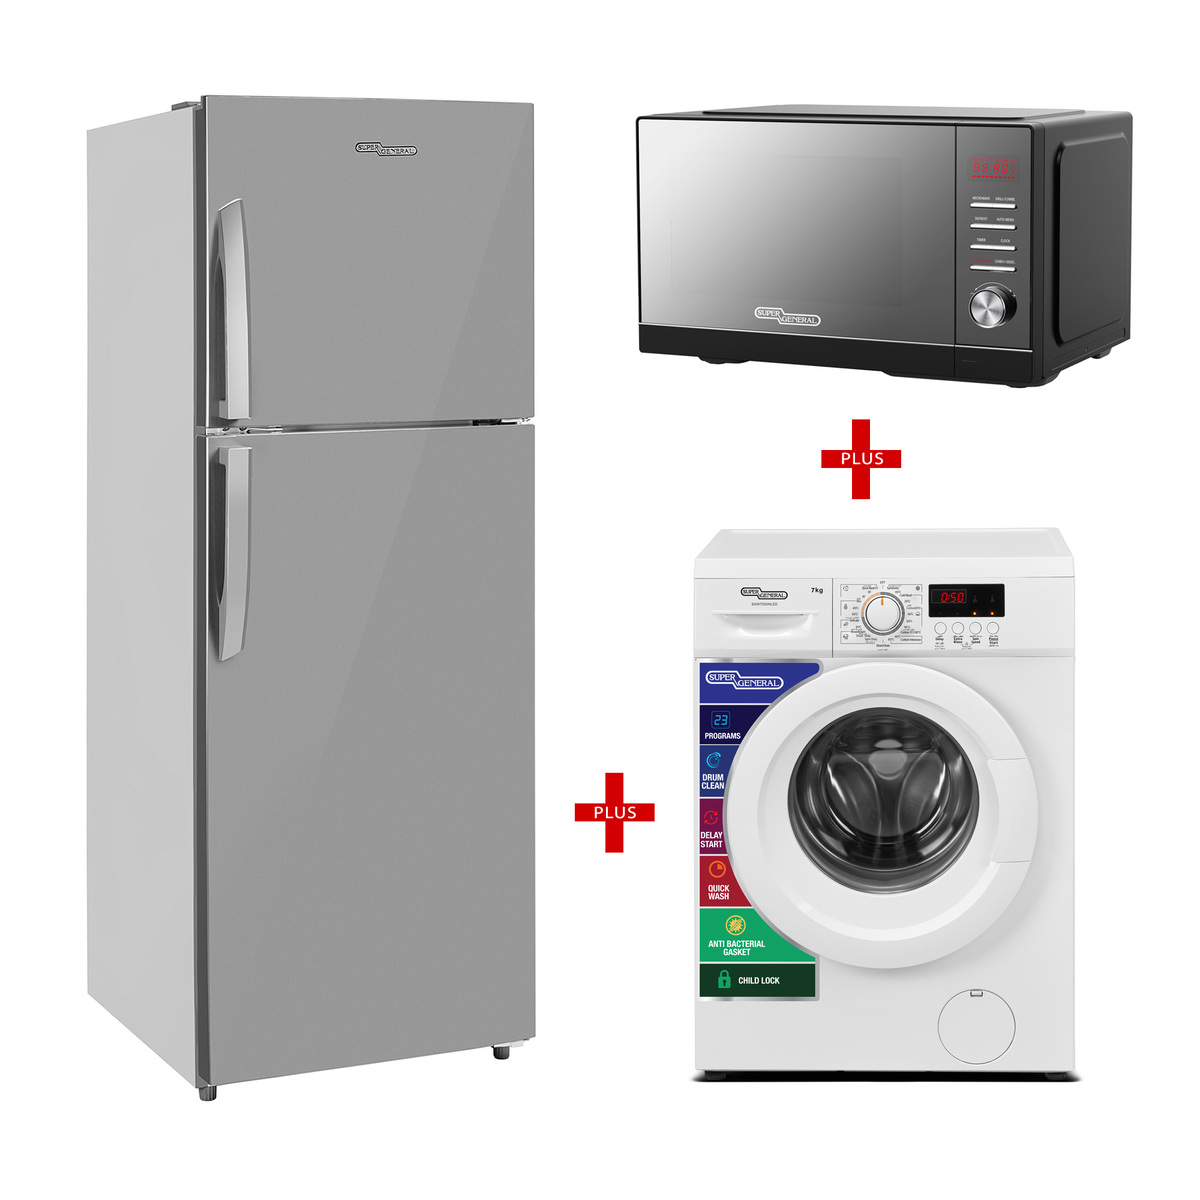 Super General Double Refrigerator SGR360I 251Ltr + Front Load Washing Machine 7kg, 1400 RPM, SGW7200NLED +  Microwave Oven 20LTR,700W, SGMM-921